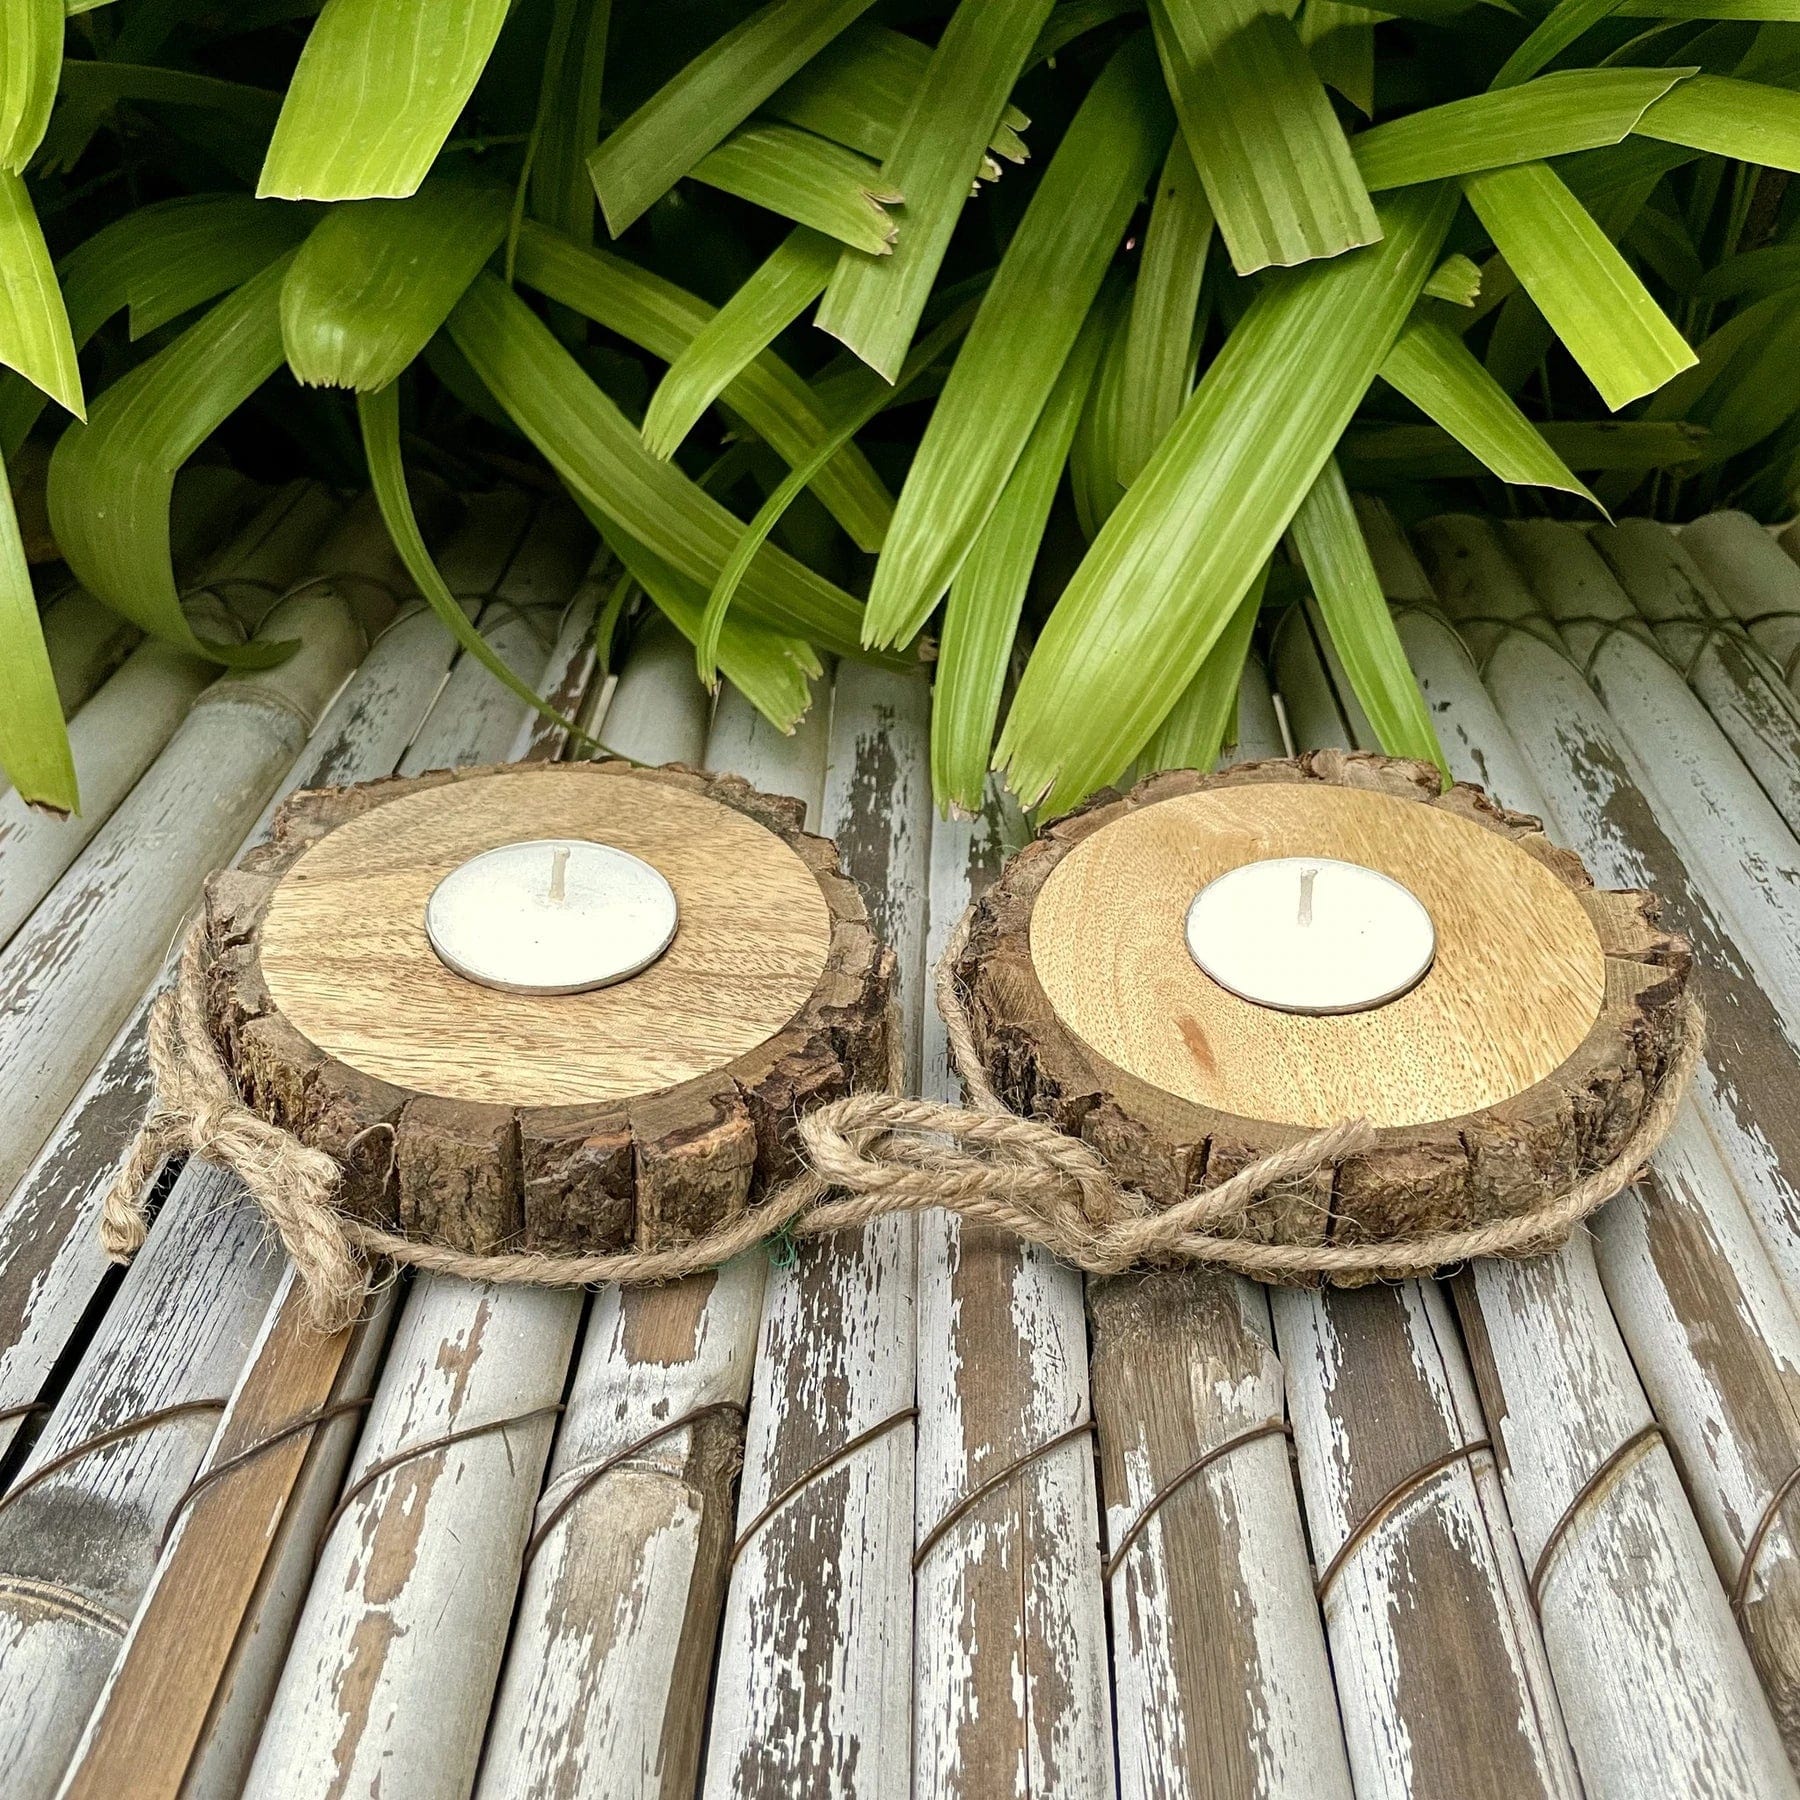 BARK STYLE CANDLE HOLDER WITH CANDLES II WOODEN CANDLE HOLDER ( SET OF 2 )